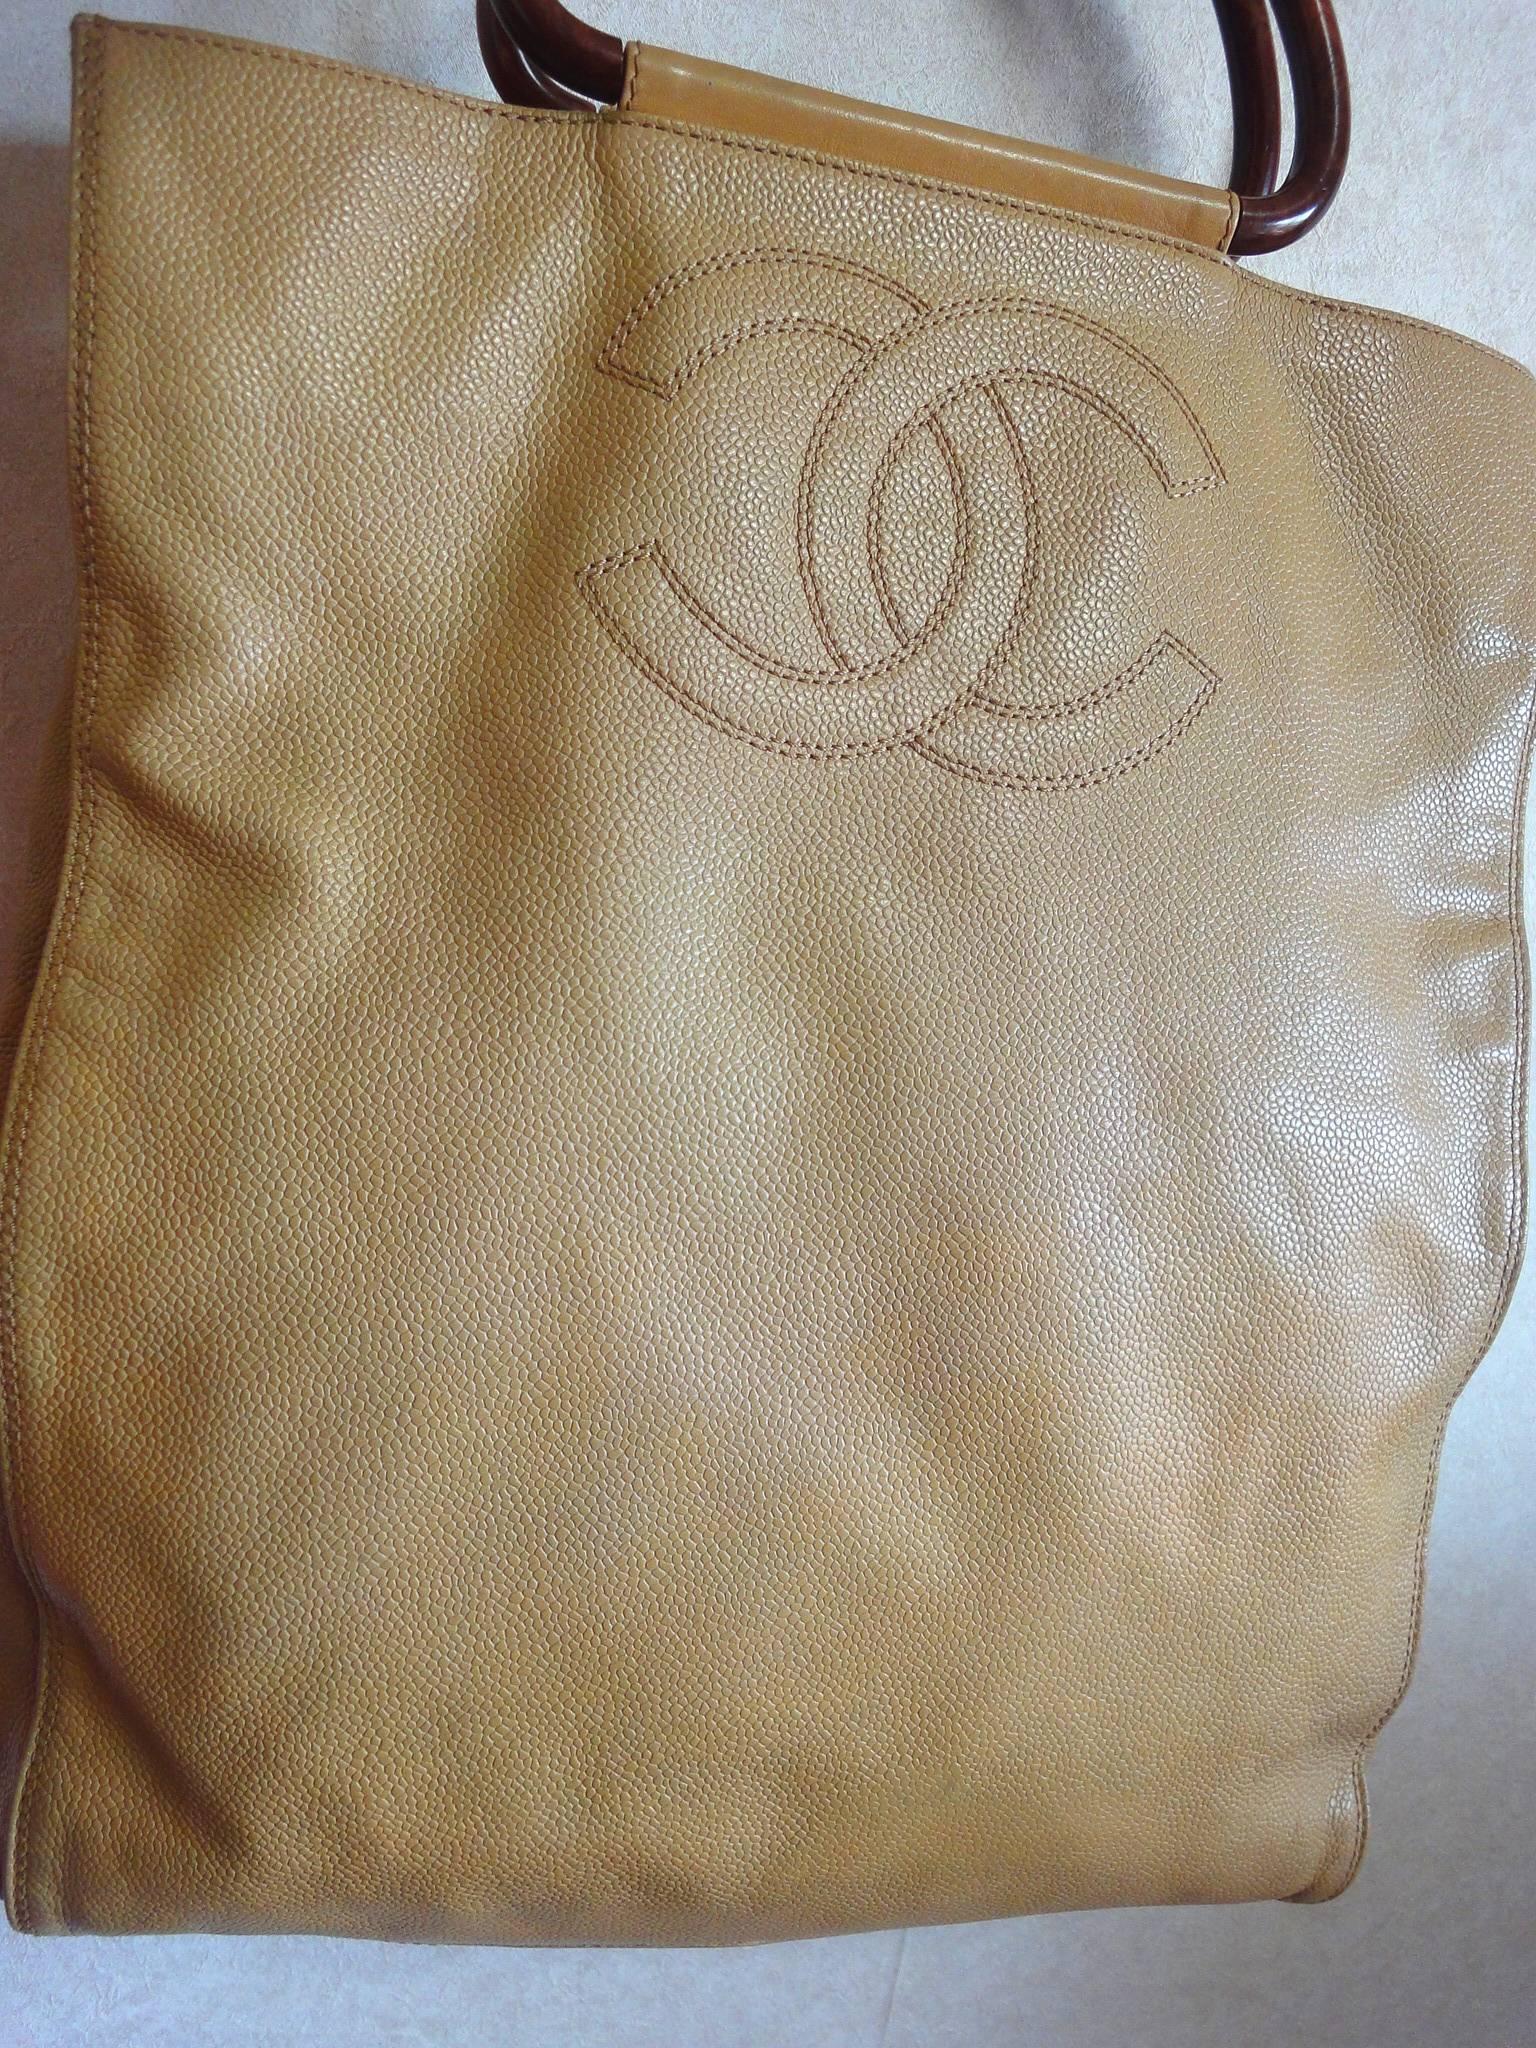 Vintage CHANEL beige caviar large shopper, tote bag with CC stitch mark.

This is a vintage caviar leather shoppers bag in beige color from CHANEL. 

If you are looking for a daily use CHANEL bag, then this is it! 
With its height